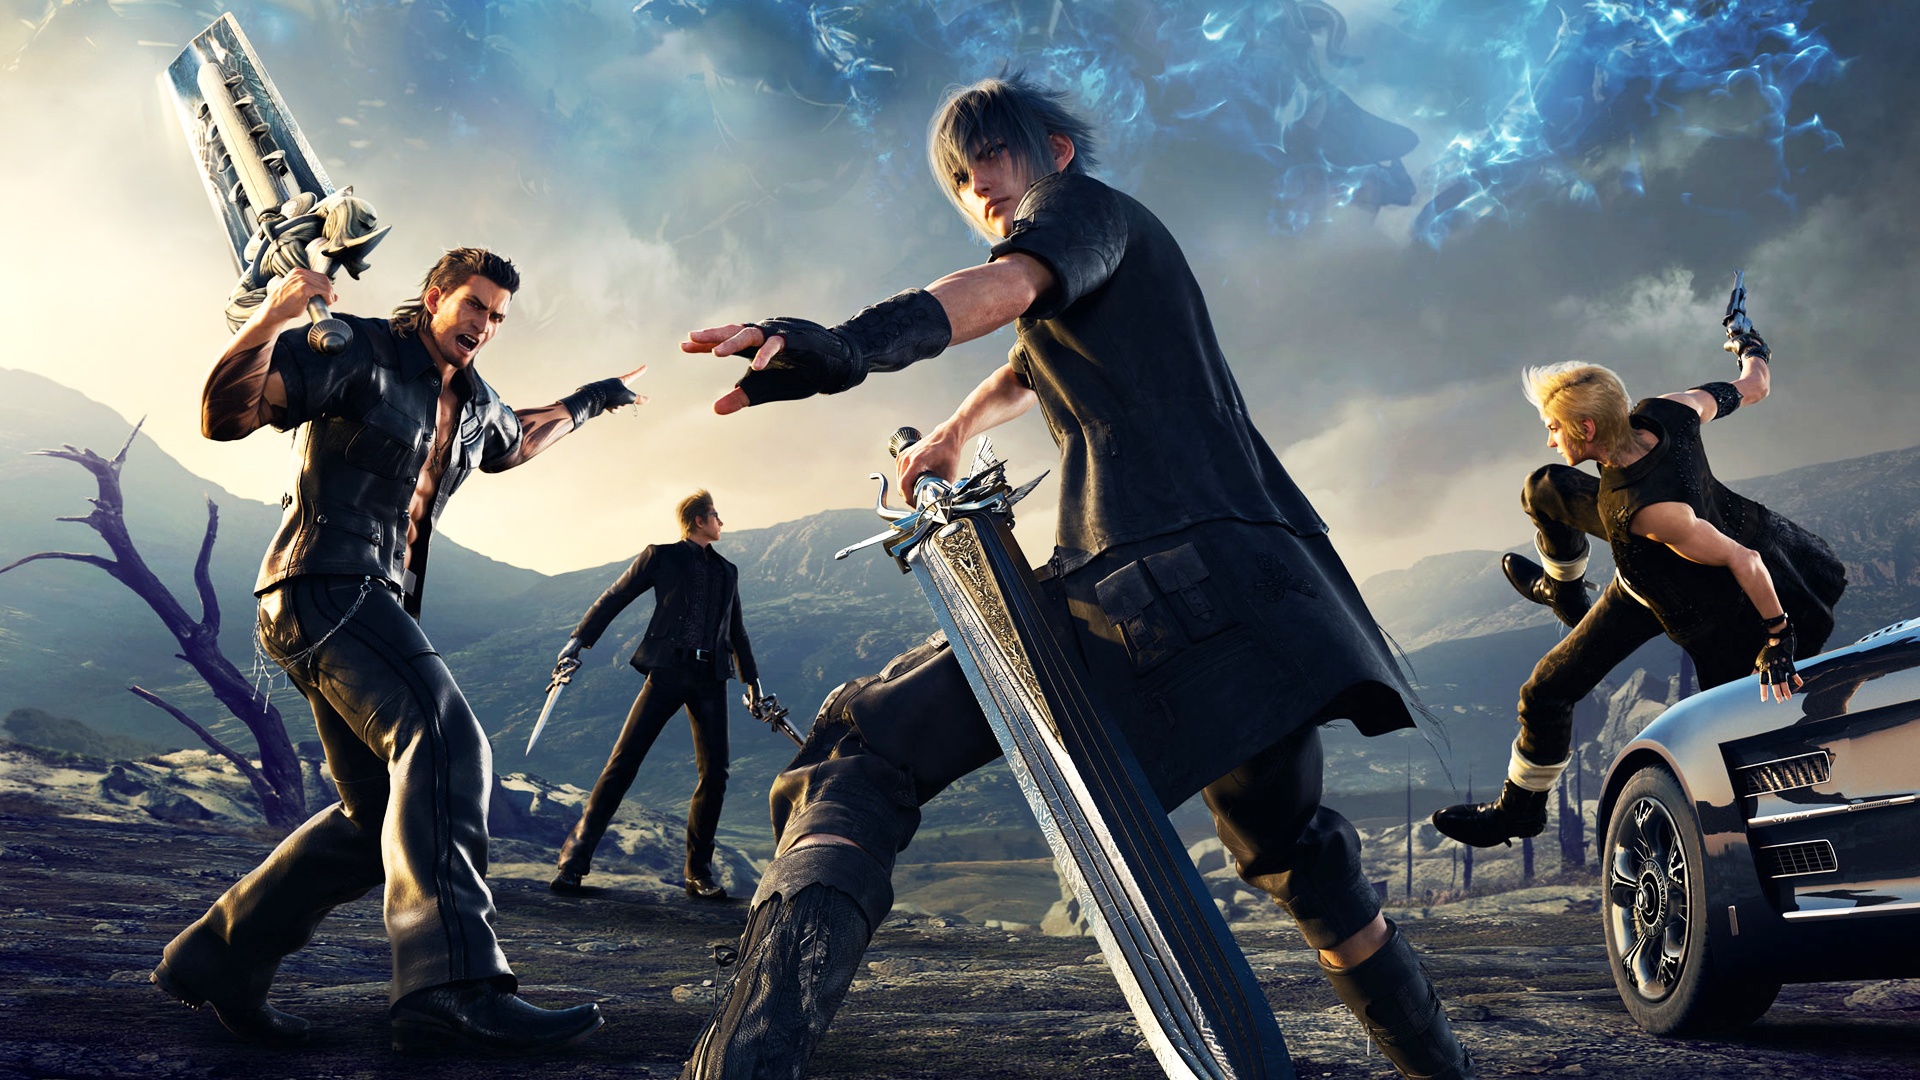 Final Fantasy XV Review (PlayStation 4) - Official GBAtemp Review |  GBAtemp.net - The Independent Video Game Community